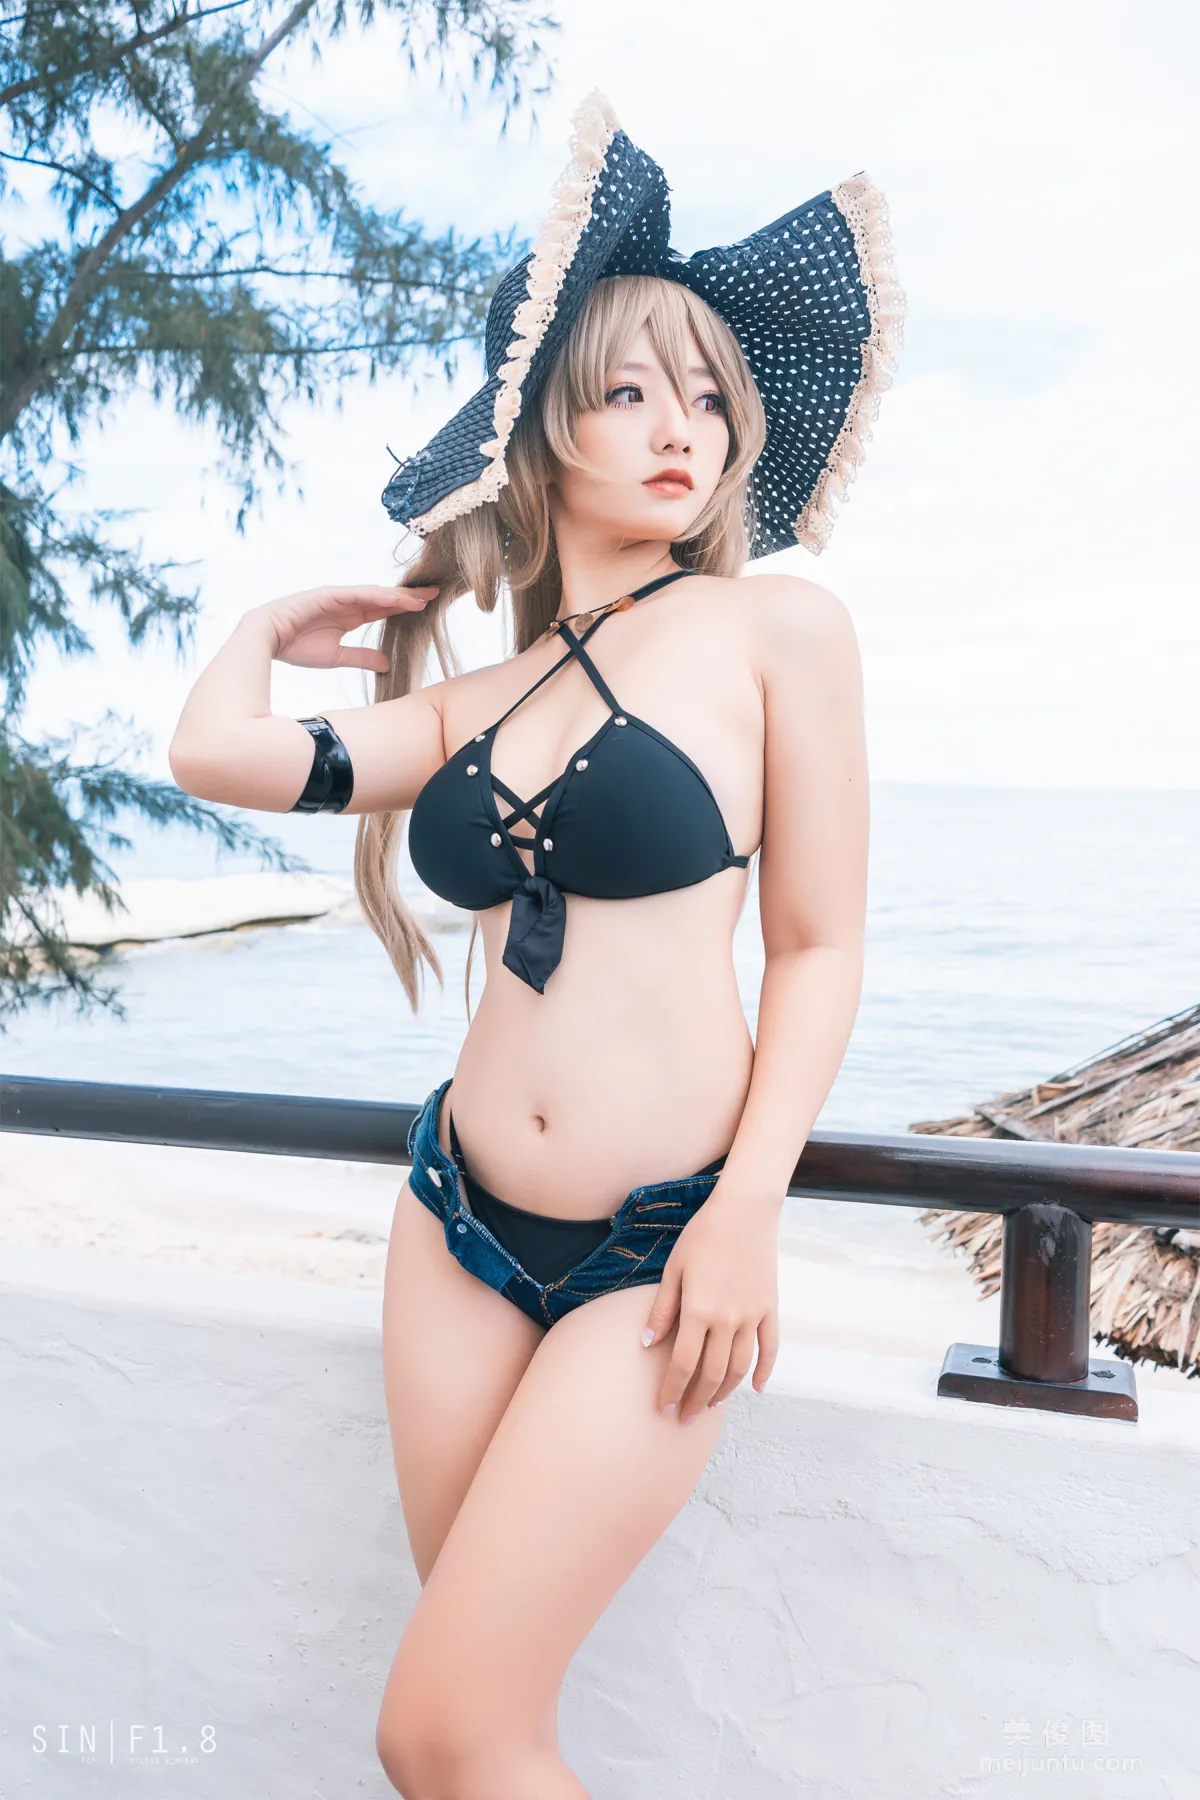 [COS福利] Messie Huang - Jean Bart swimsuit2